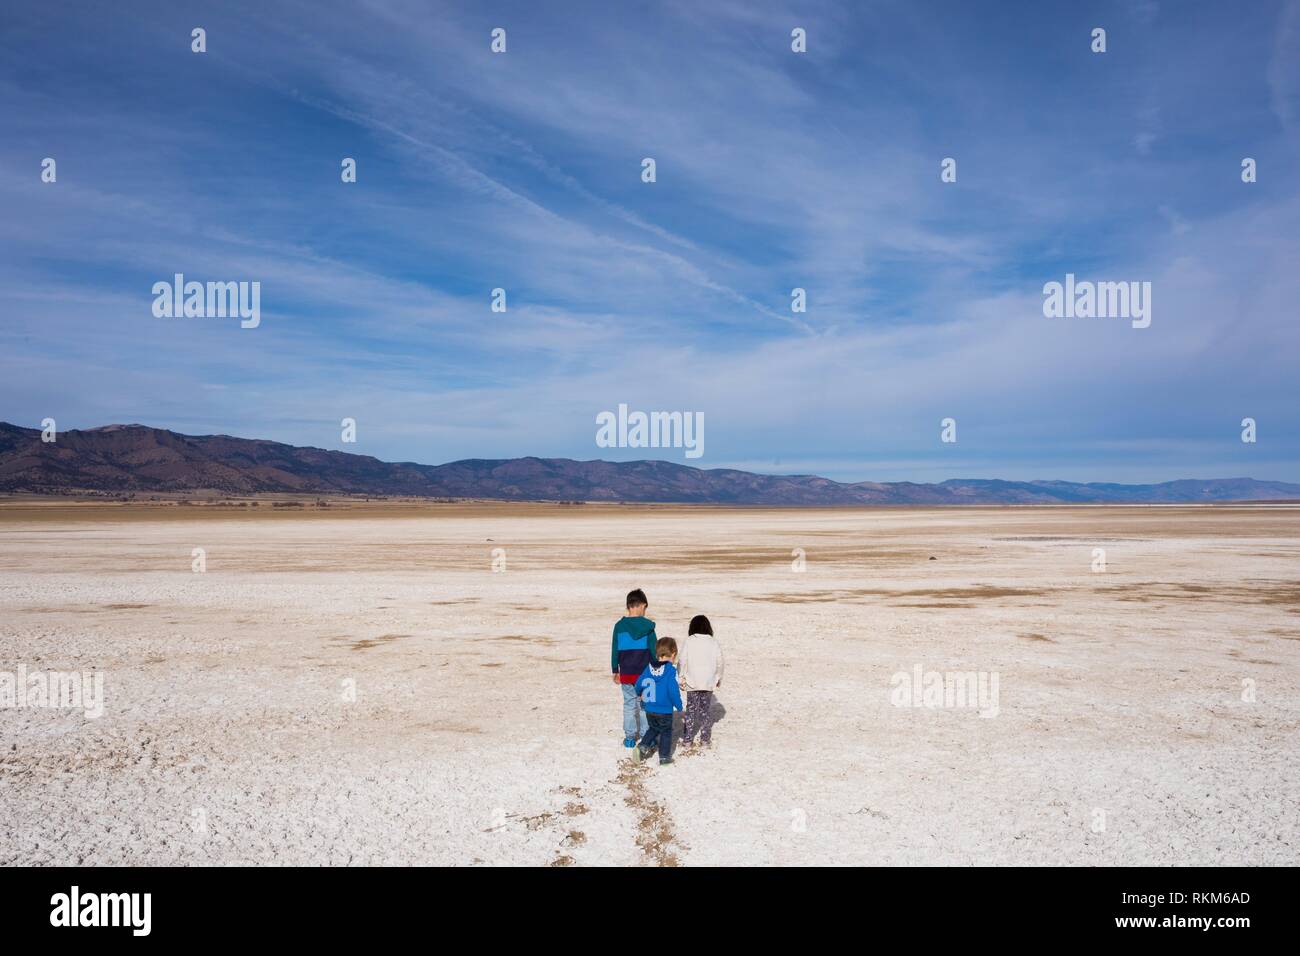 Three young kids run across the mineral and salt flats of the dry lake bed at Middle Alkali Lake near Cedarville California. Stock Photo